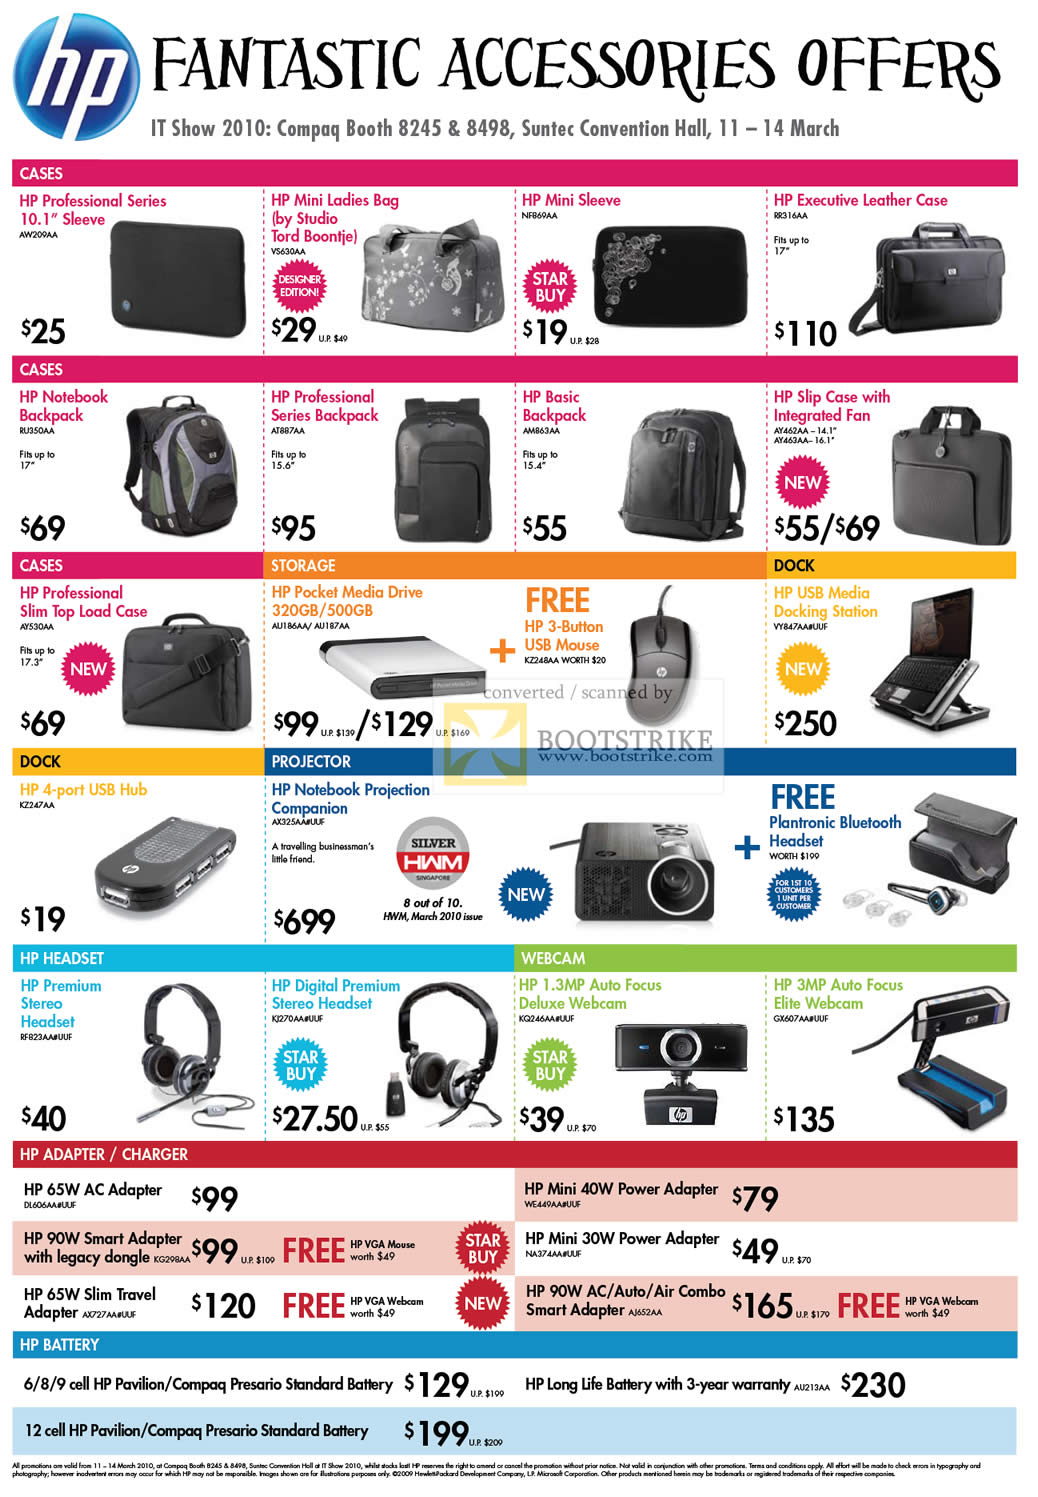 IT Show 2010 price list image brochure of HP Accessories Cases External Storage Dock Projectors Headset Webcam Adapter Charger Battery